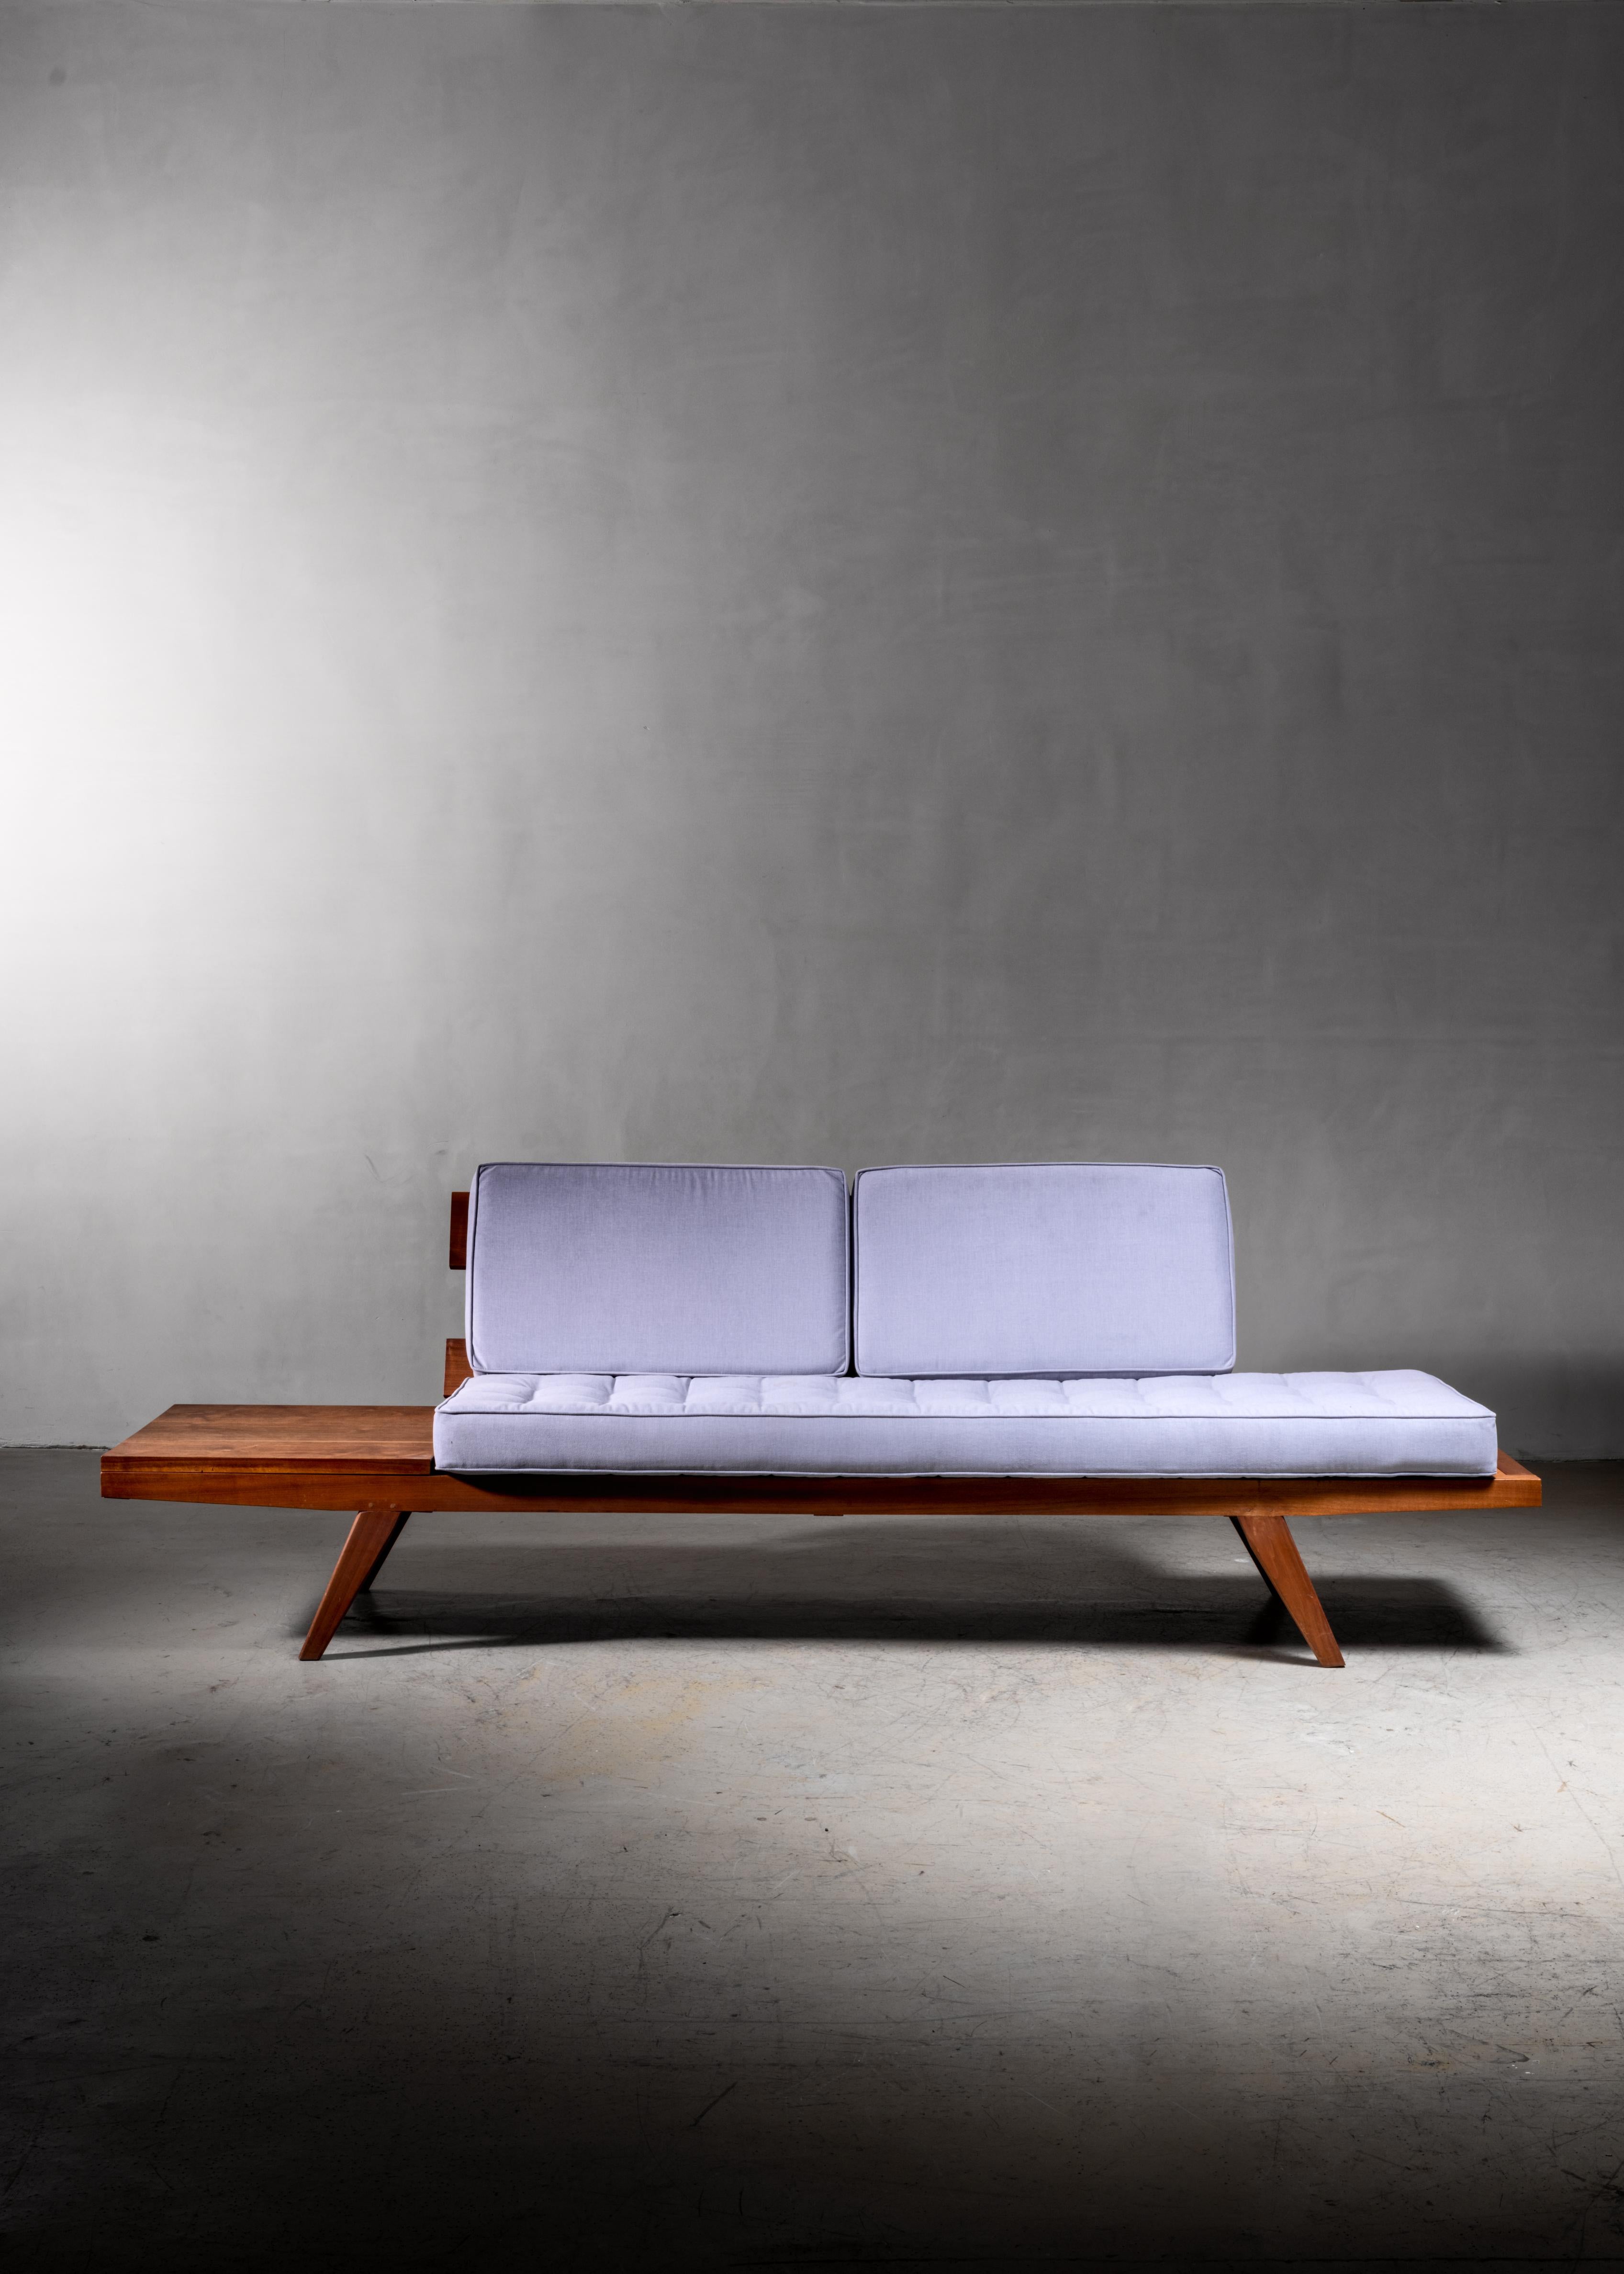 A studio crafted sofa by American woodworker Rude Osolnik. The sofa is made of wood with three custom-made cushions with a blue fabric upholstery.

Osolnik (1915-2001) was one of the most important post-war American craftsmen. The Queen of England